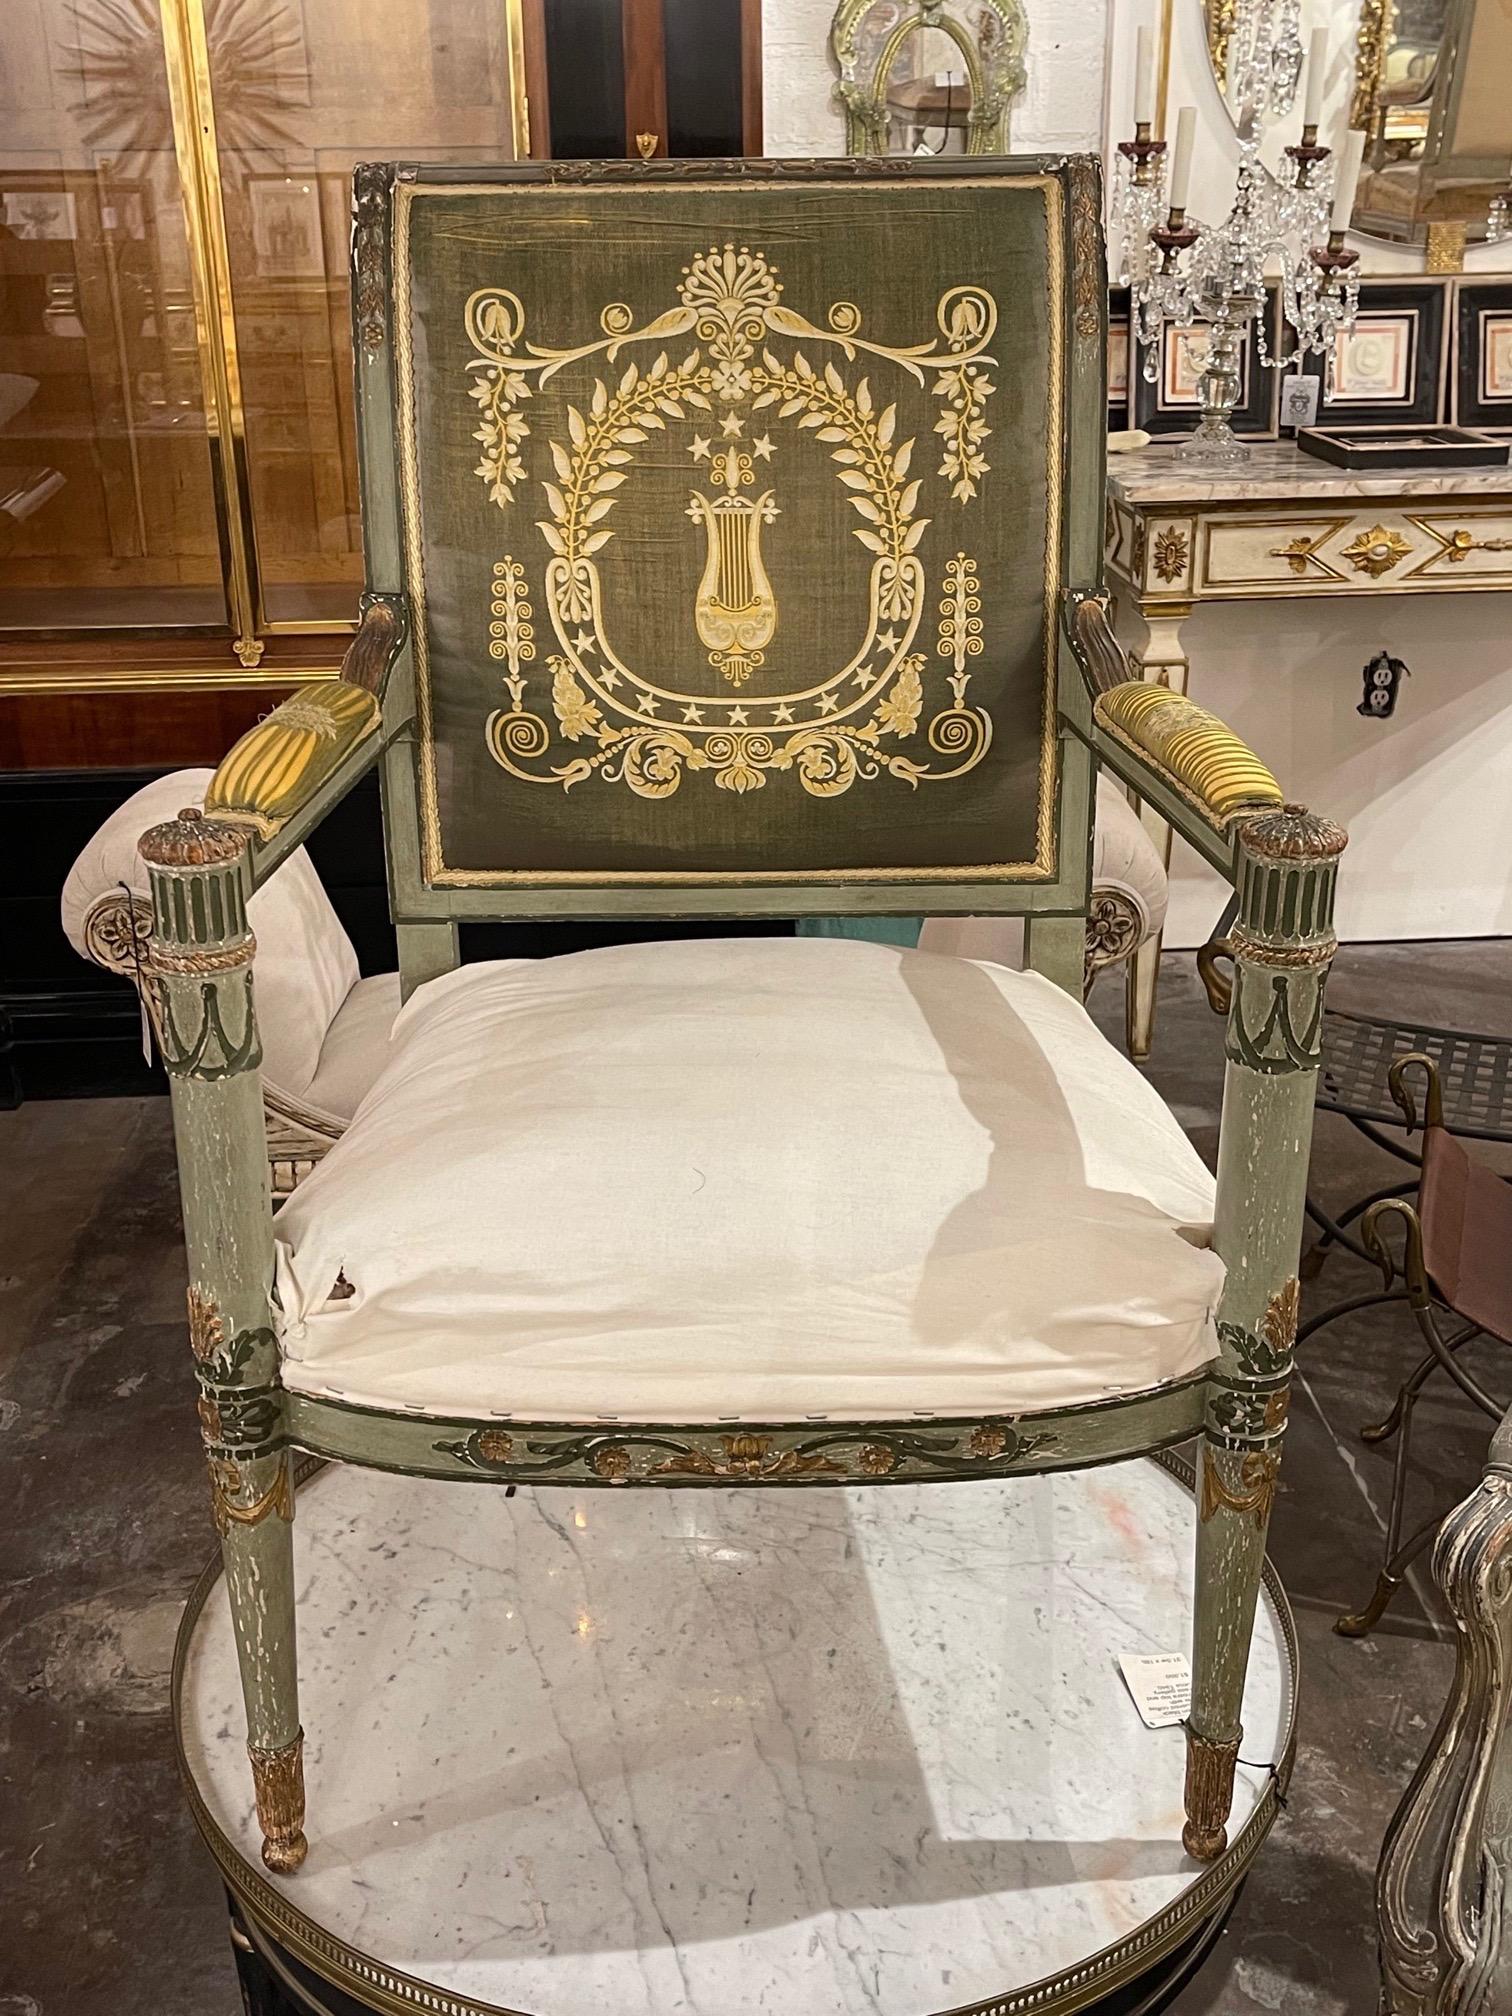 Decorative 19th century Italian Neo-Classical style carved and painted arm chair. Painted in shades of green and gold with a beautiful upholstery on the back. Adds a reach touch of elegance!